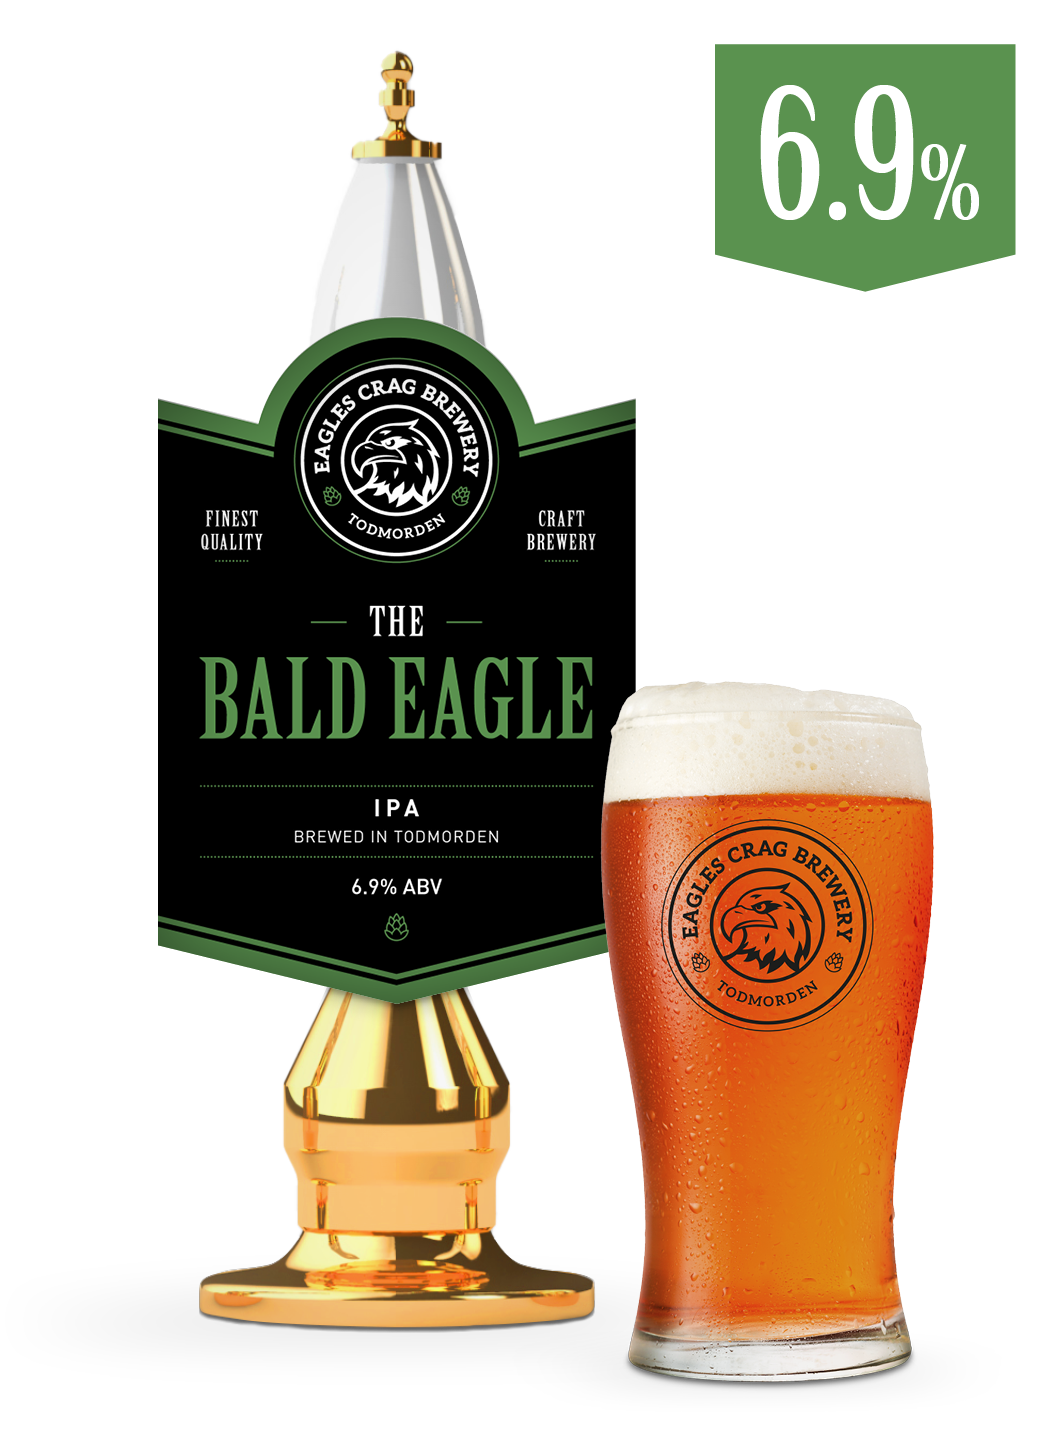 Craft beer cask and pint of The Bald Eagle